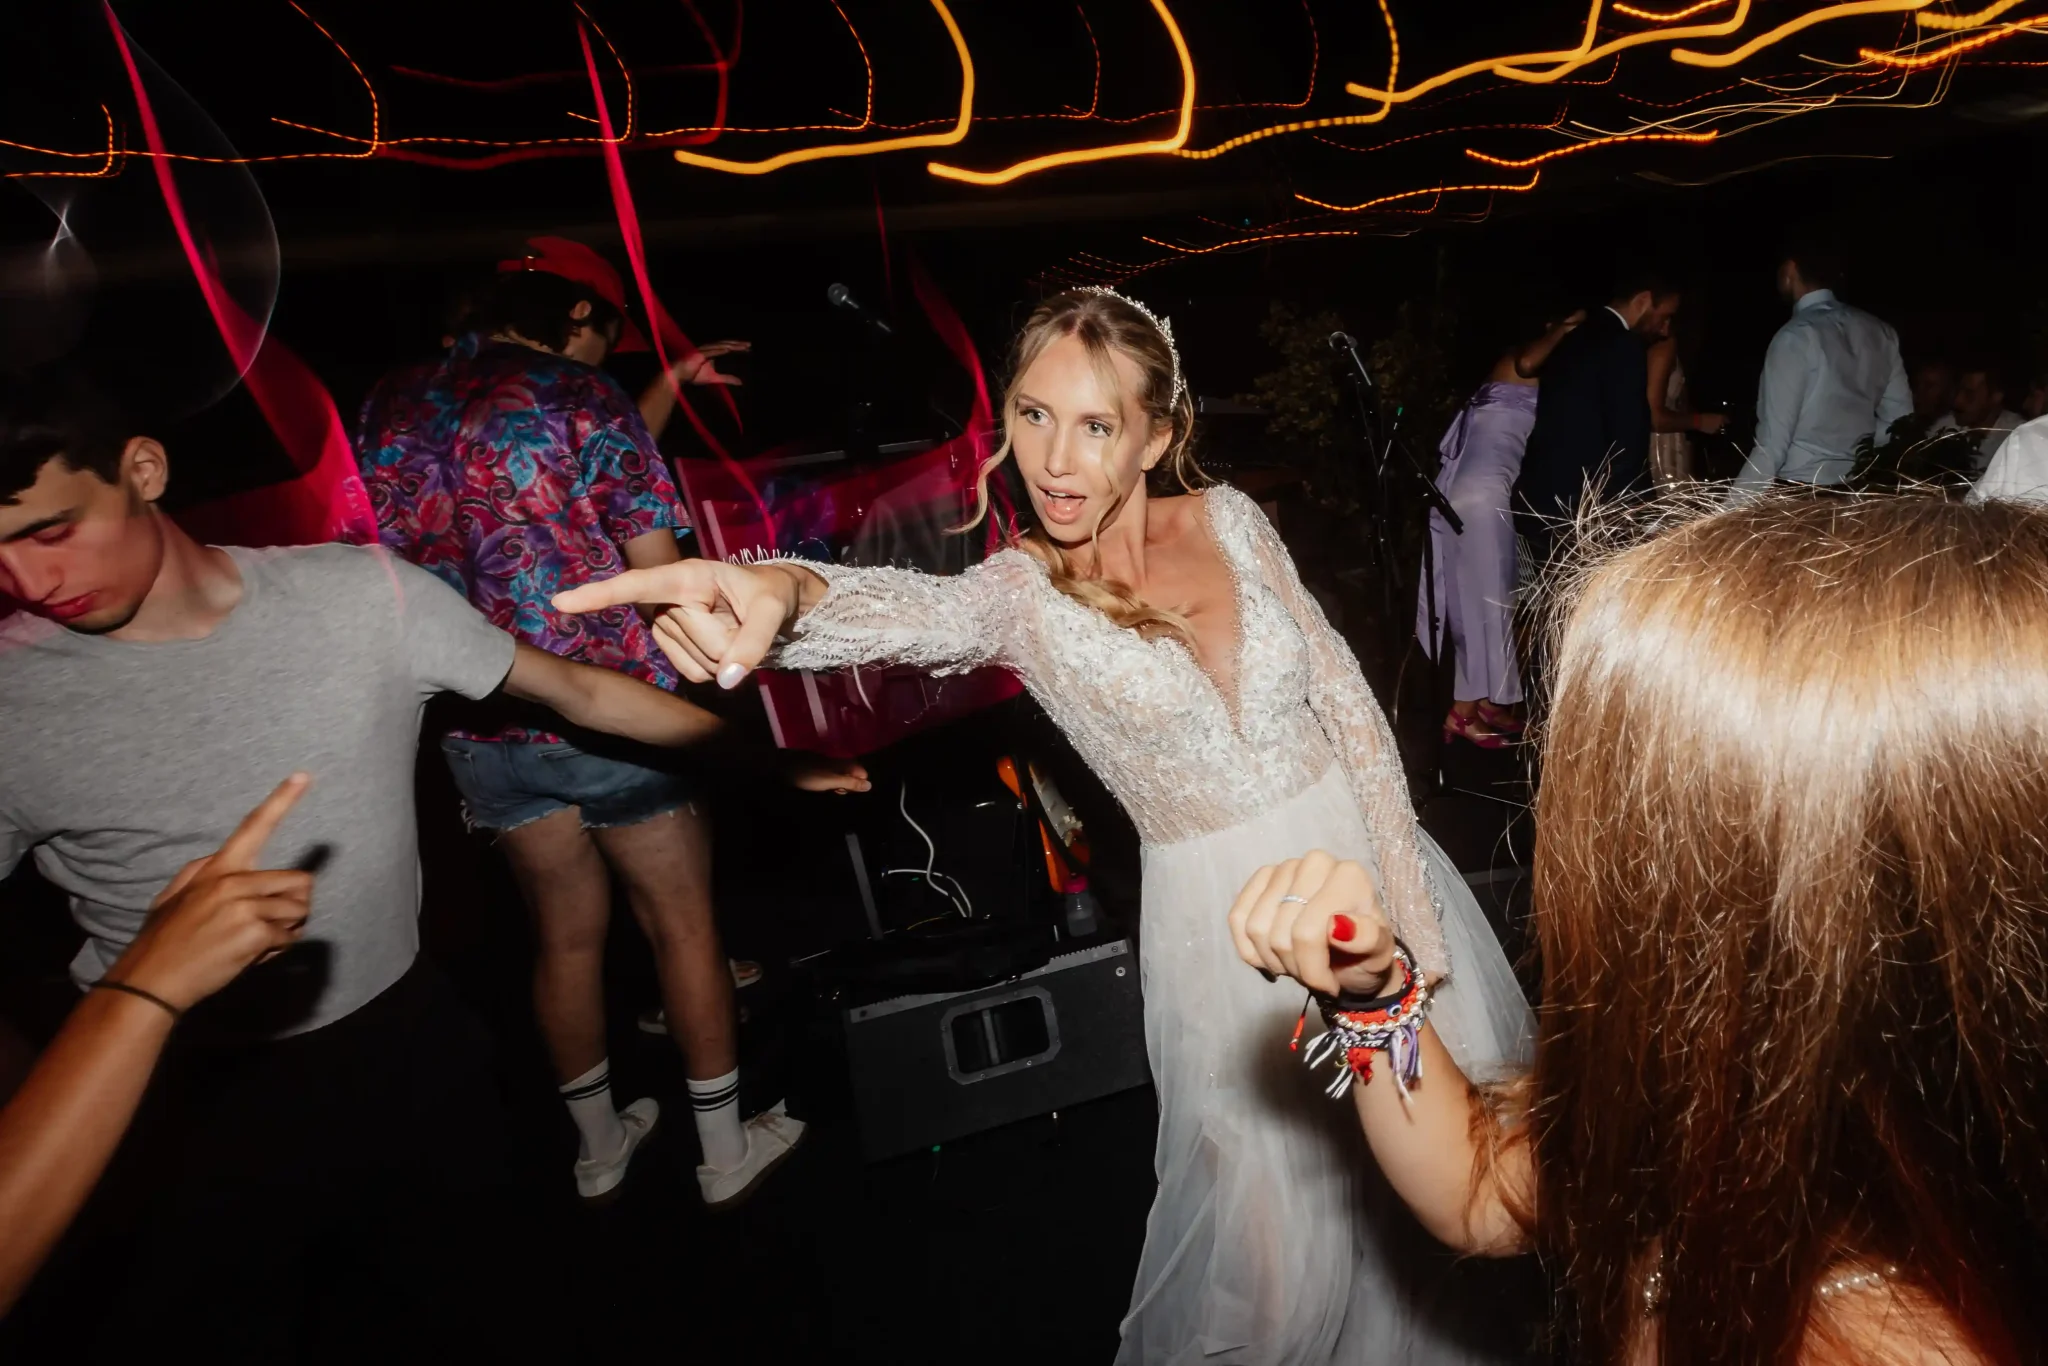 A bride dancing with her friends at a party.